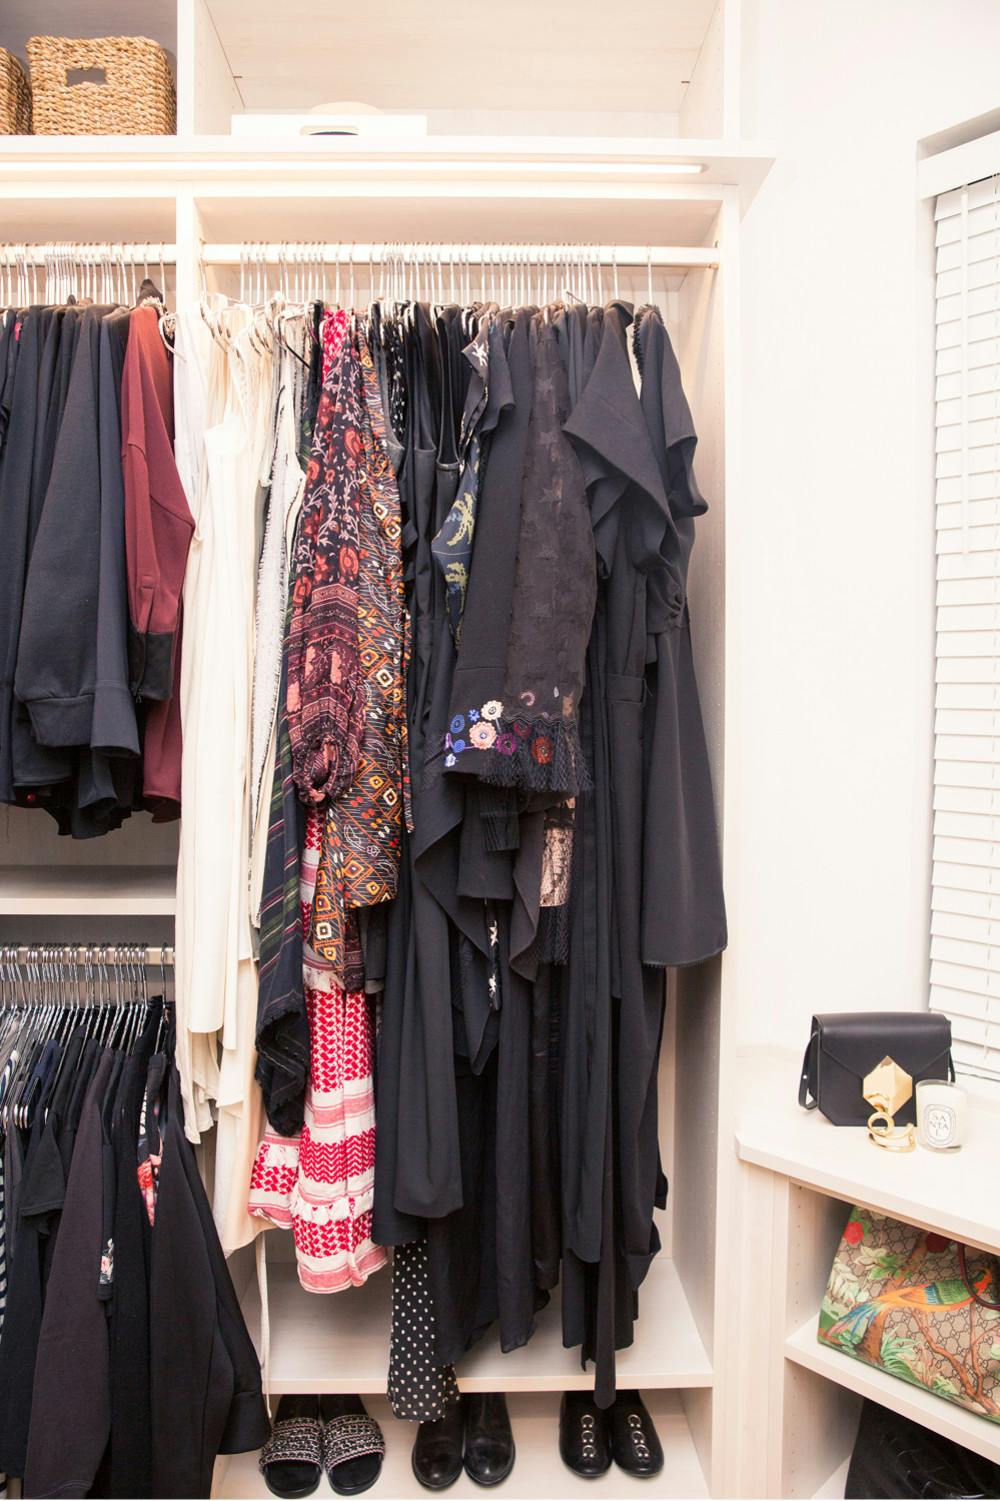 How to Style Skirts Over Pants - Coveteur: Inside Closets, Fashion